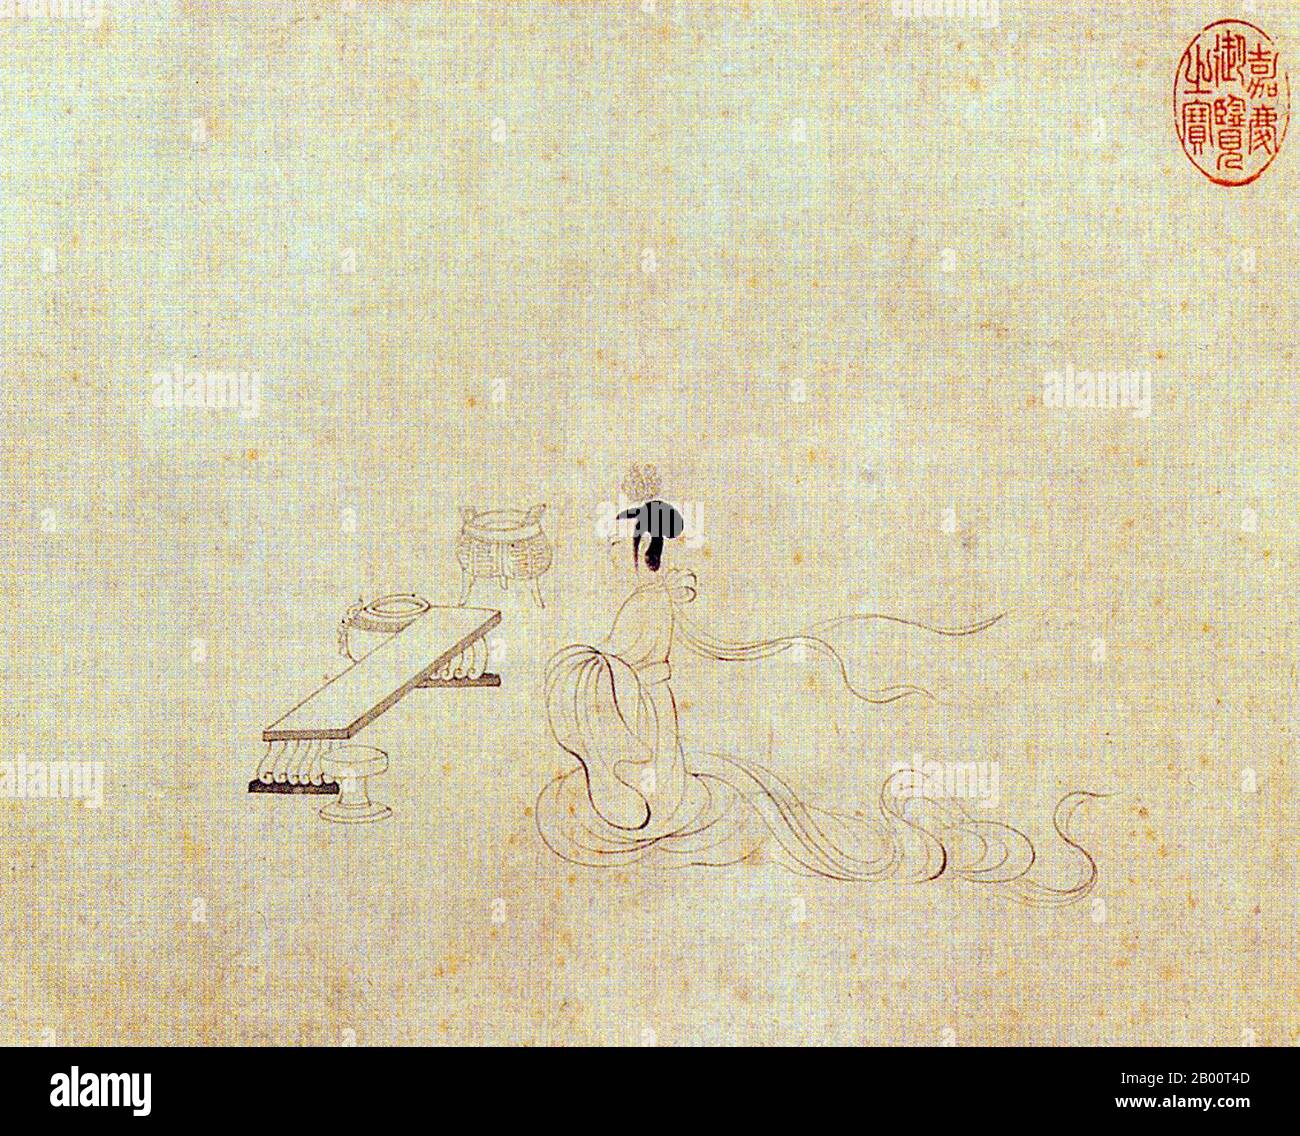 China: The Admonitions Scroll, Scene 2 - Lady Fan (Beijing Palace Museum copy).  The Admonitions Scroll is a Chinese narrative painting on silk that is traditionally ascribed to Gu Kaizhi  (c.345-c.406 CE), but which modern scholarship regards as a 5th to 8th century work that may be a copy of an original Jin Dynasty (265–420 CE) court painting by Gu Kaizhi. The full title of the painting is Admonitions of the Court Instructress (Chinese: Nushi Zhentu). It was painted to illustrate a poetic text written in 292 by the poet-official Zhang Hua (232–300). Stock Photo